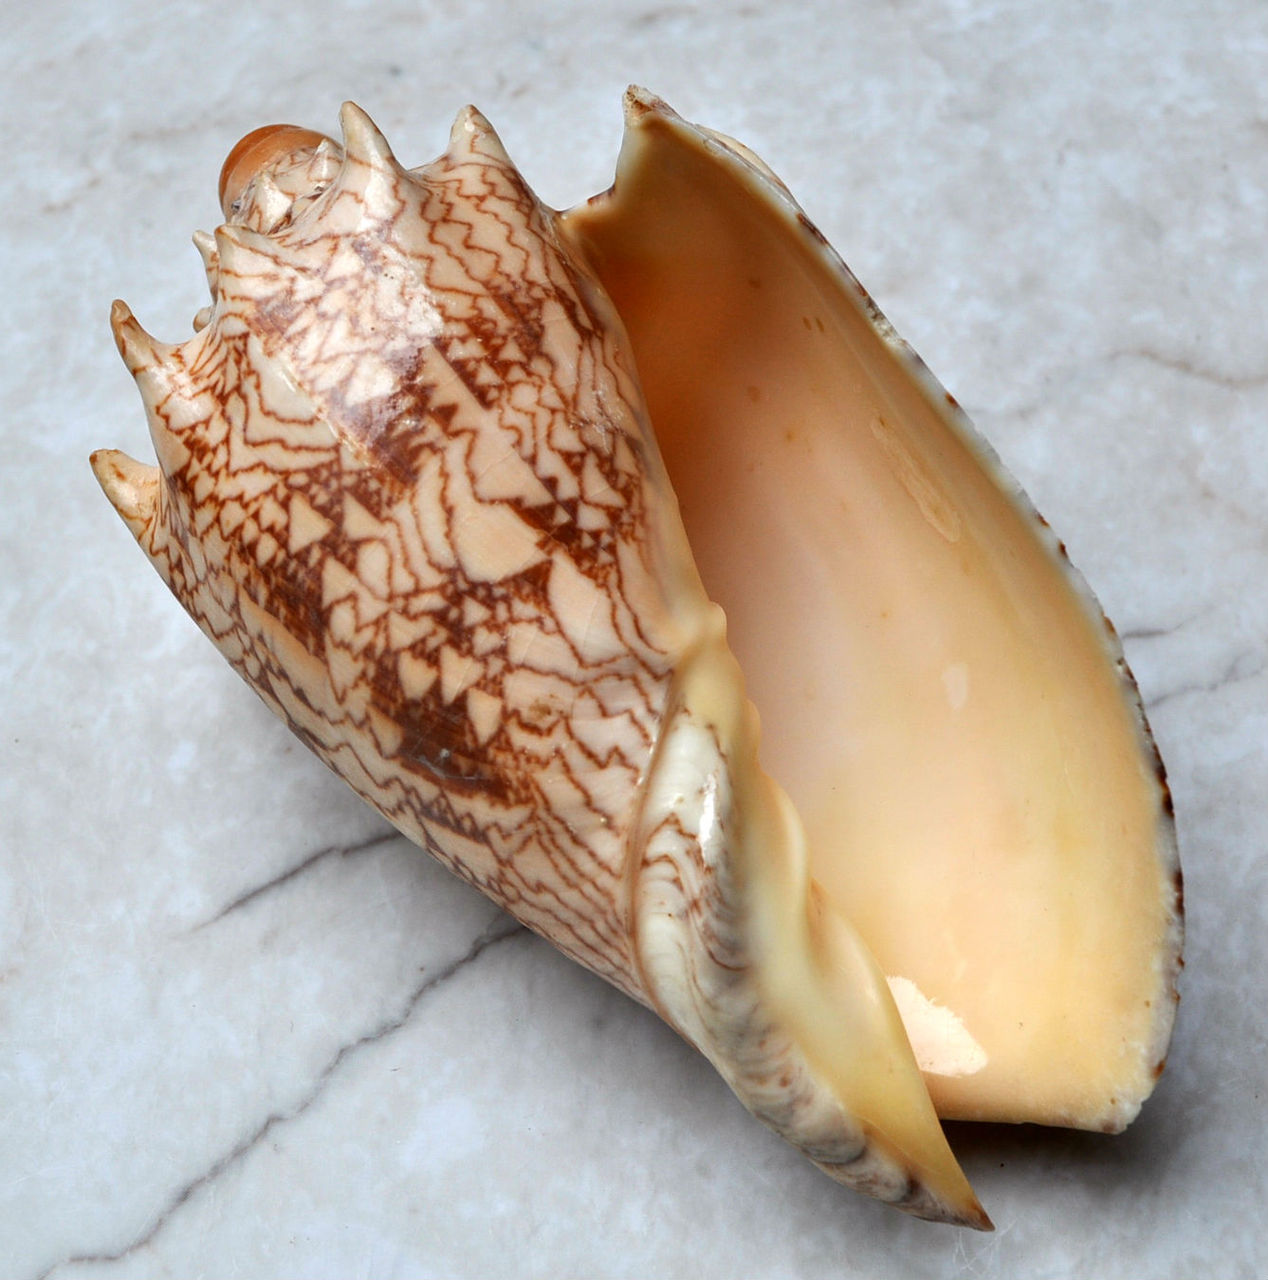 Imperial Volute Seashell - Voluta Imperialis - (1 shell approx. 5-6 inches) Tan shaded wrapped shell. Copyright 2022 SeaShellSupply.com.